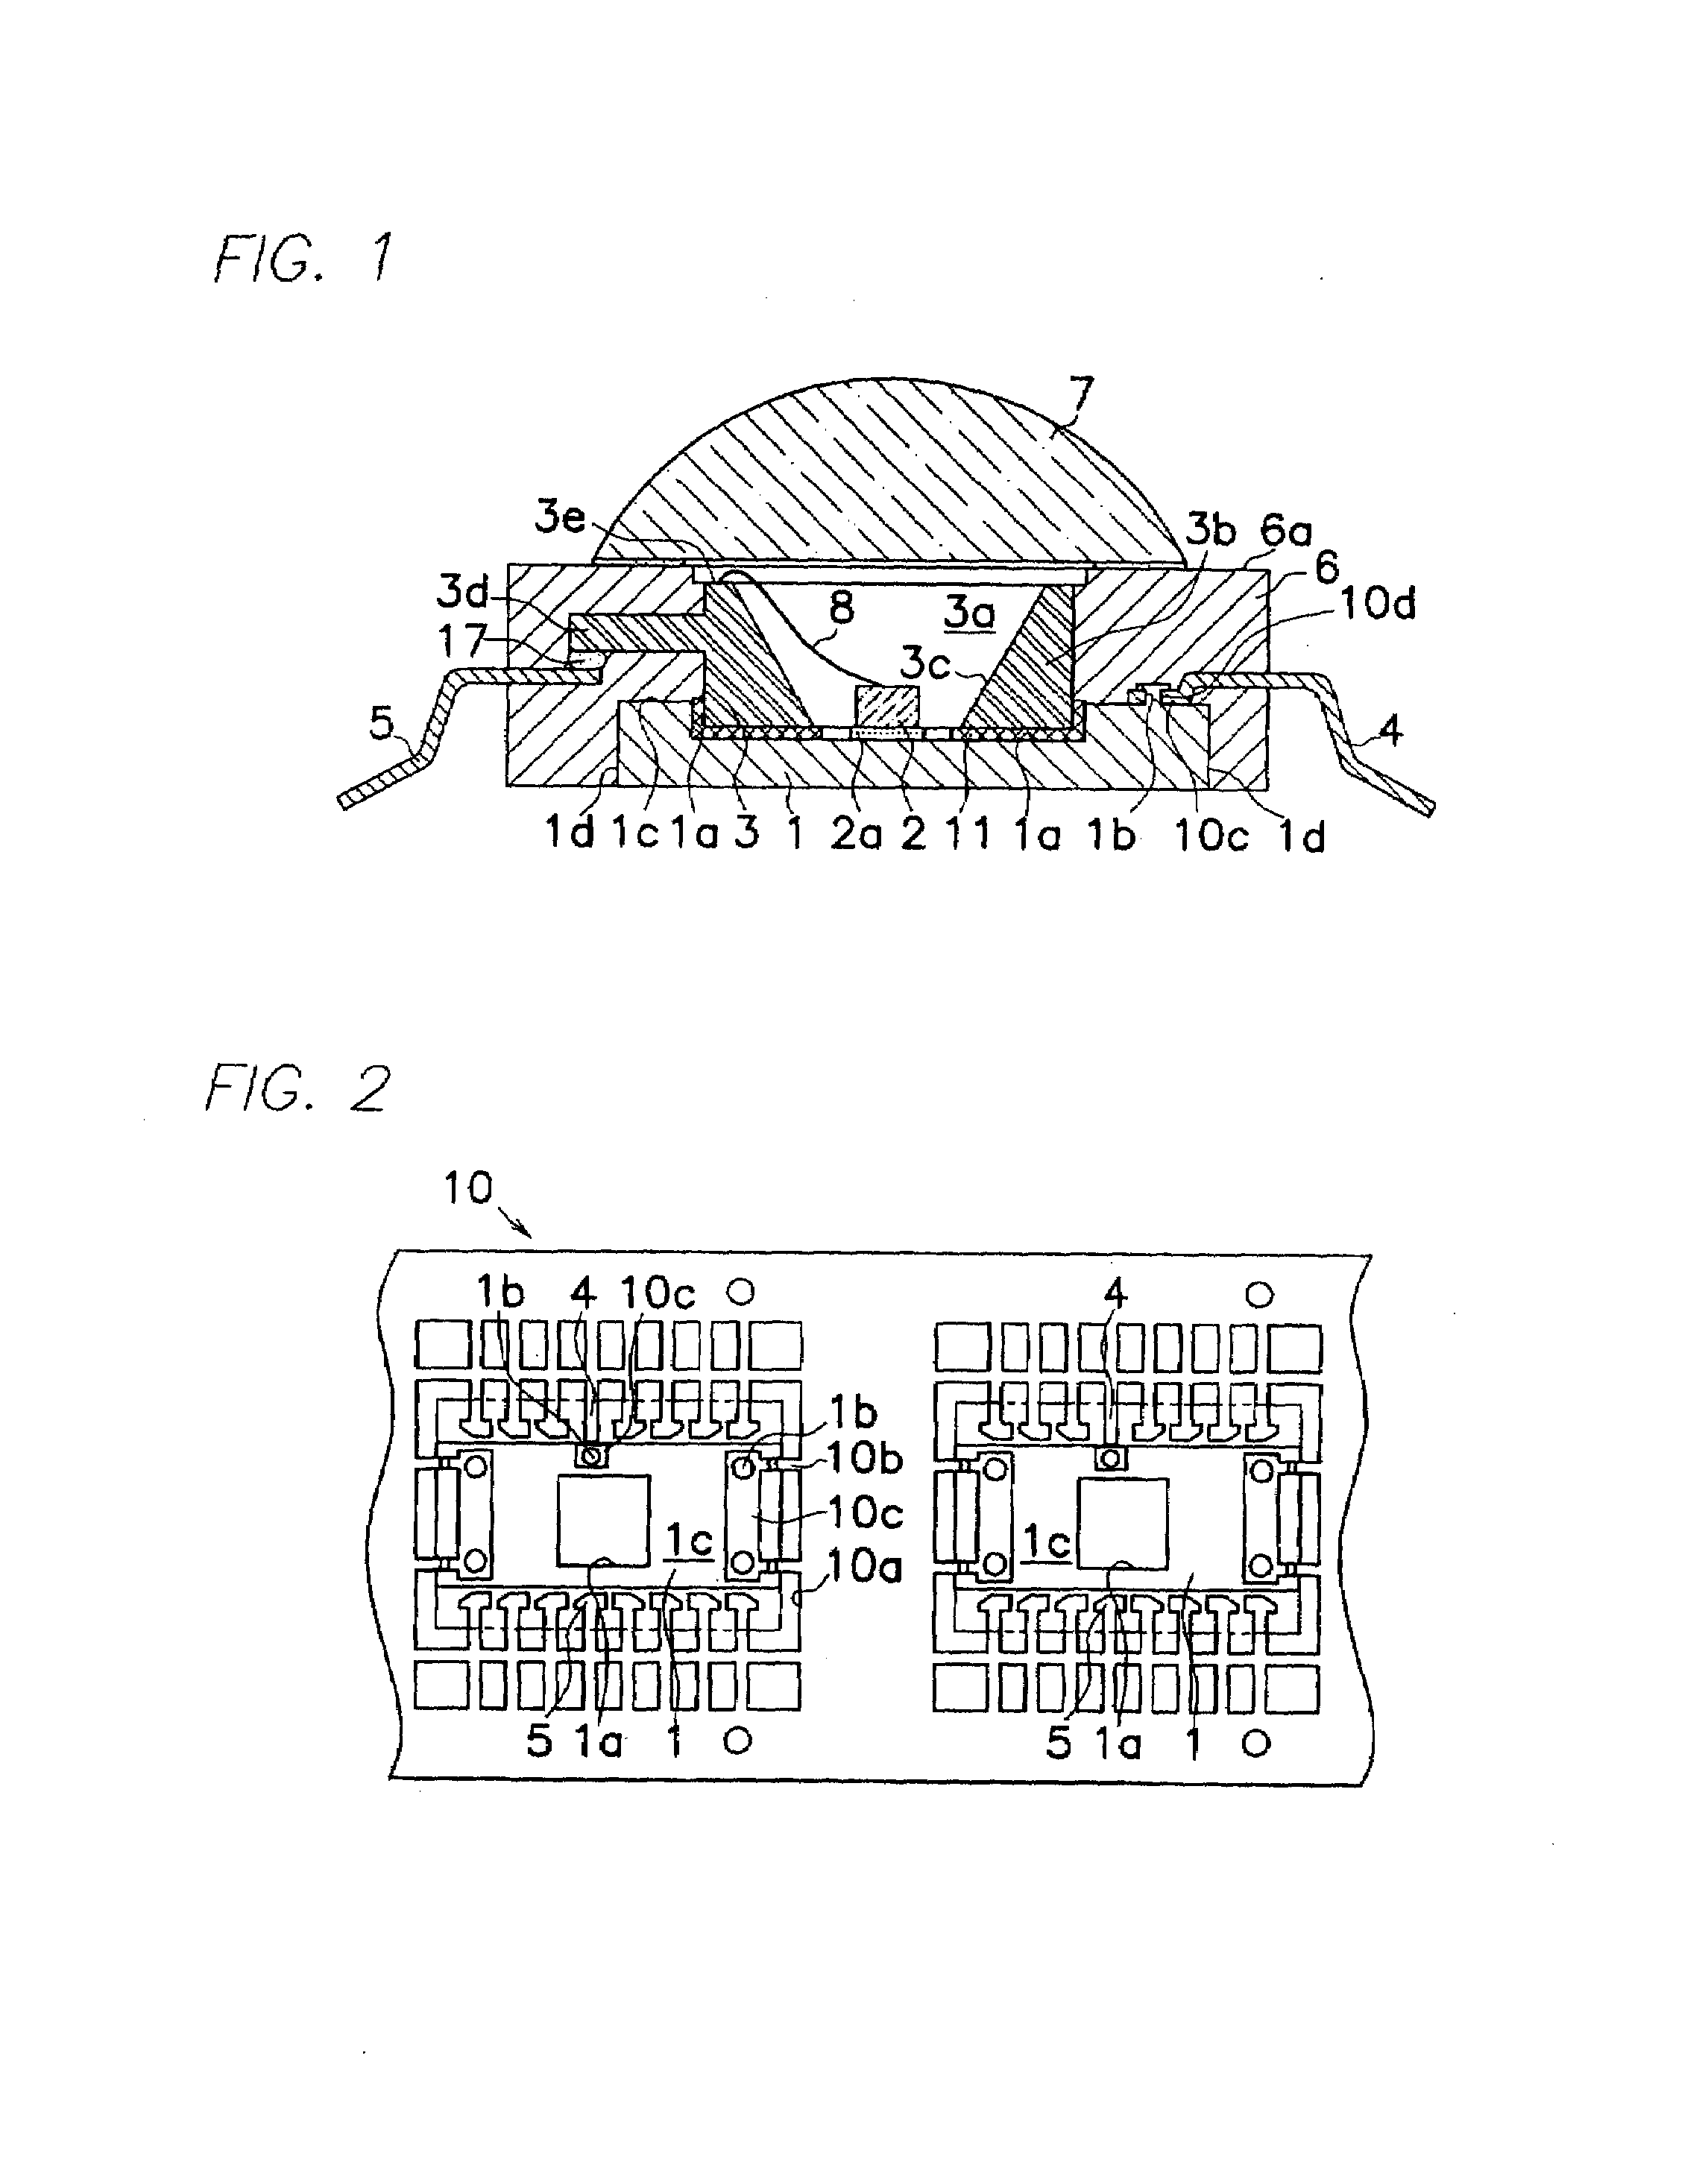 Semiconductor light emitting device capable of increasing its brightness